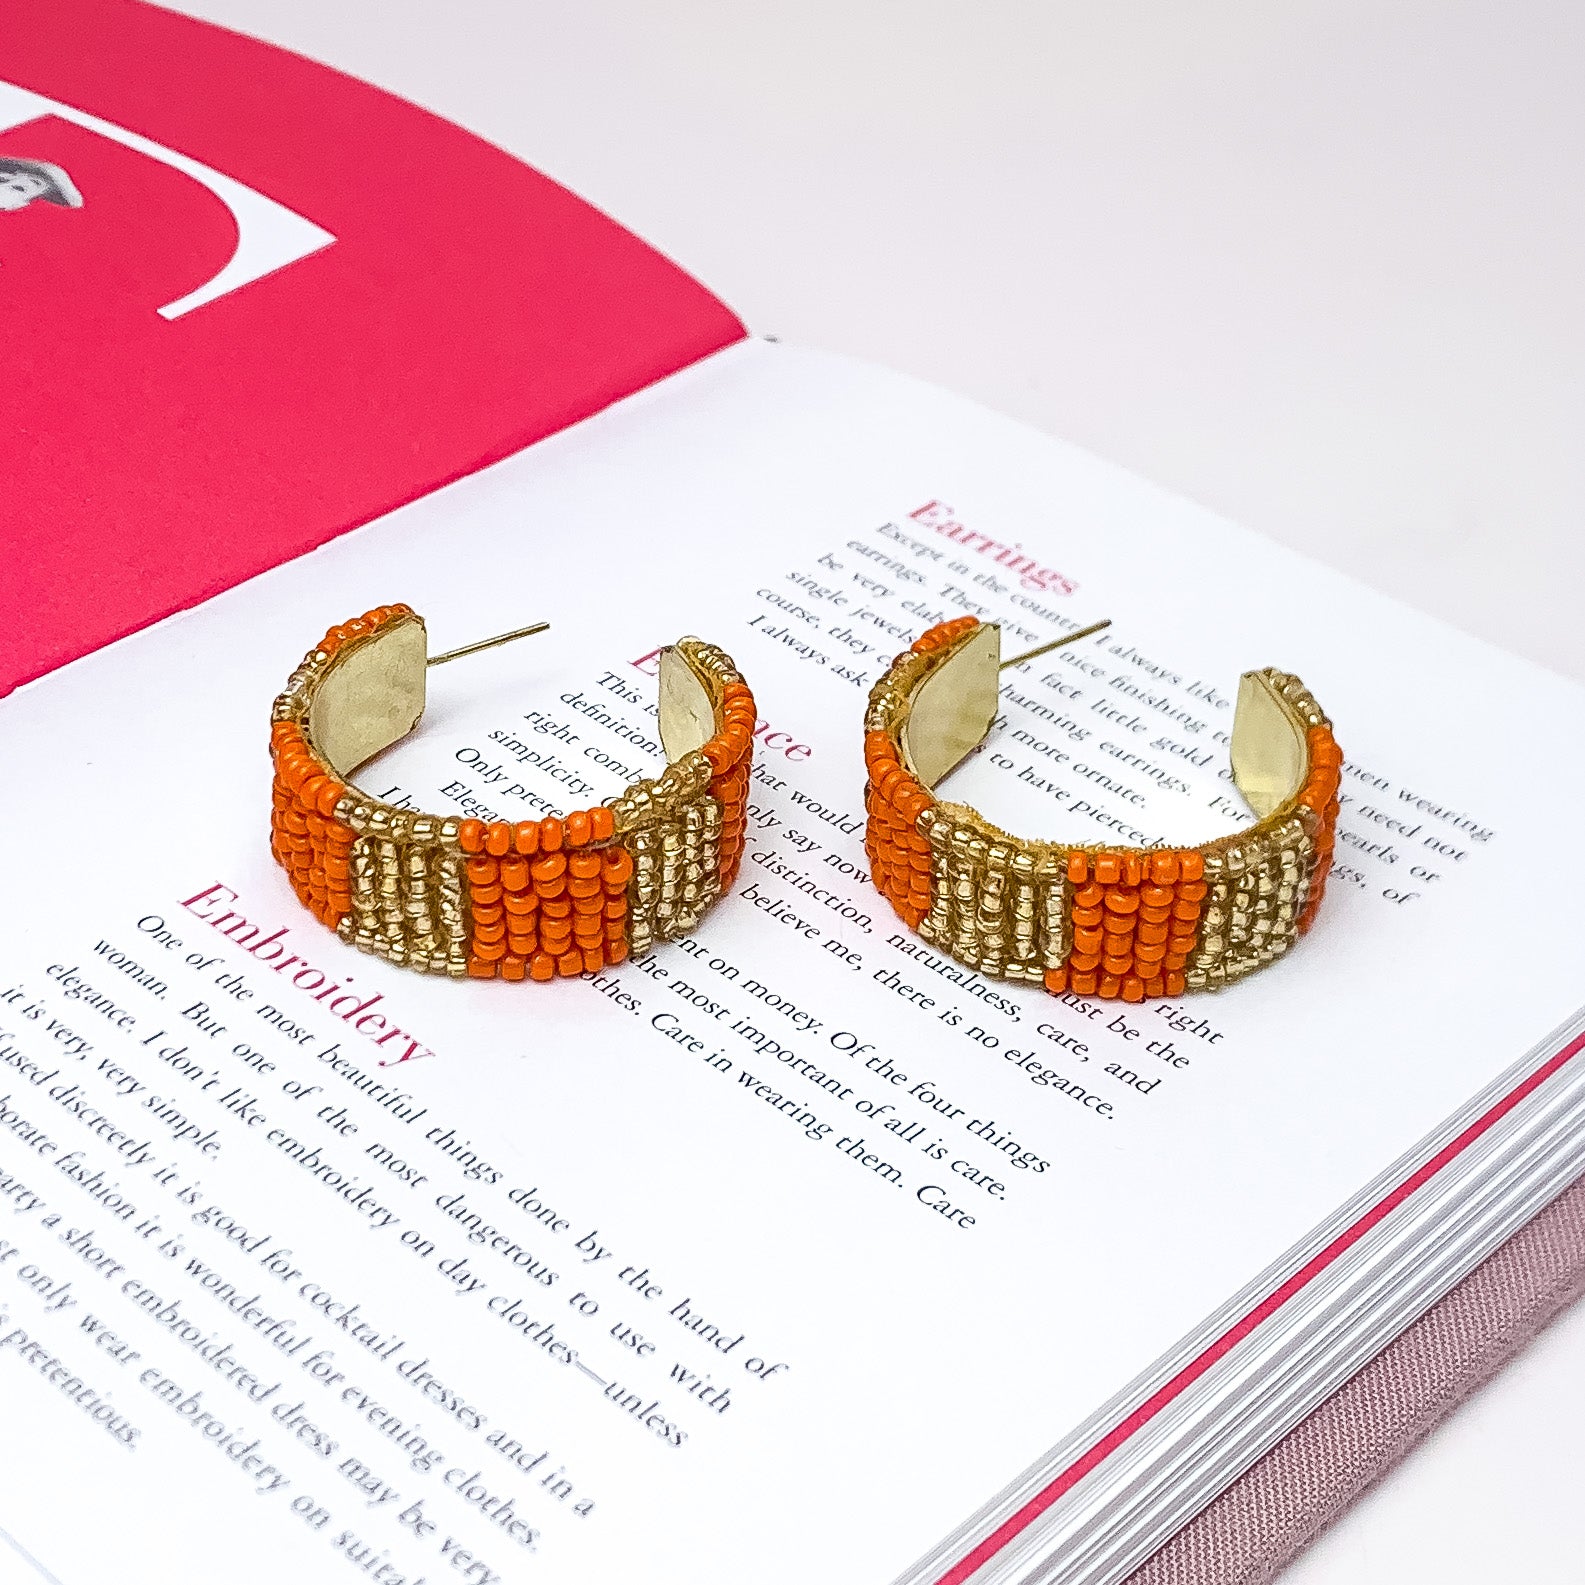 Vacay Era Gold Tone Beaded Hoop Earrings in Orange. Pictured on a white background with the earrings laying on an open book.